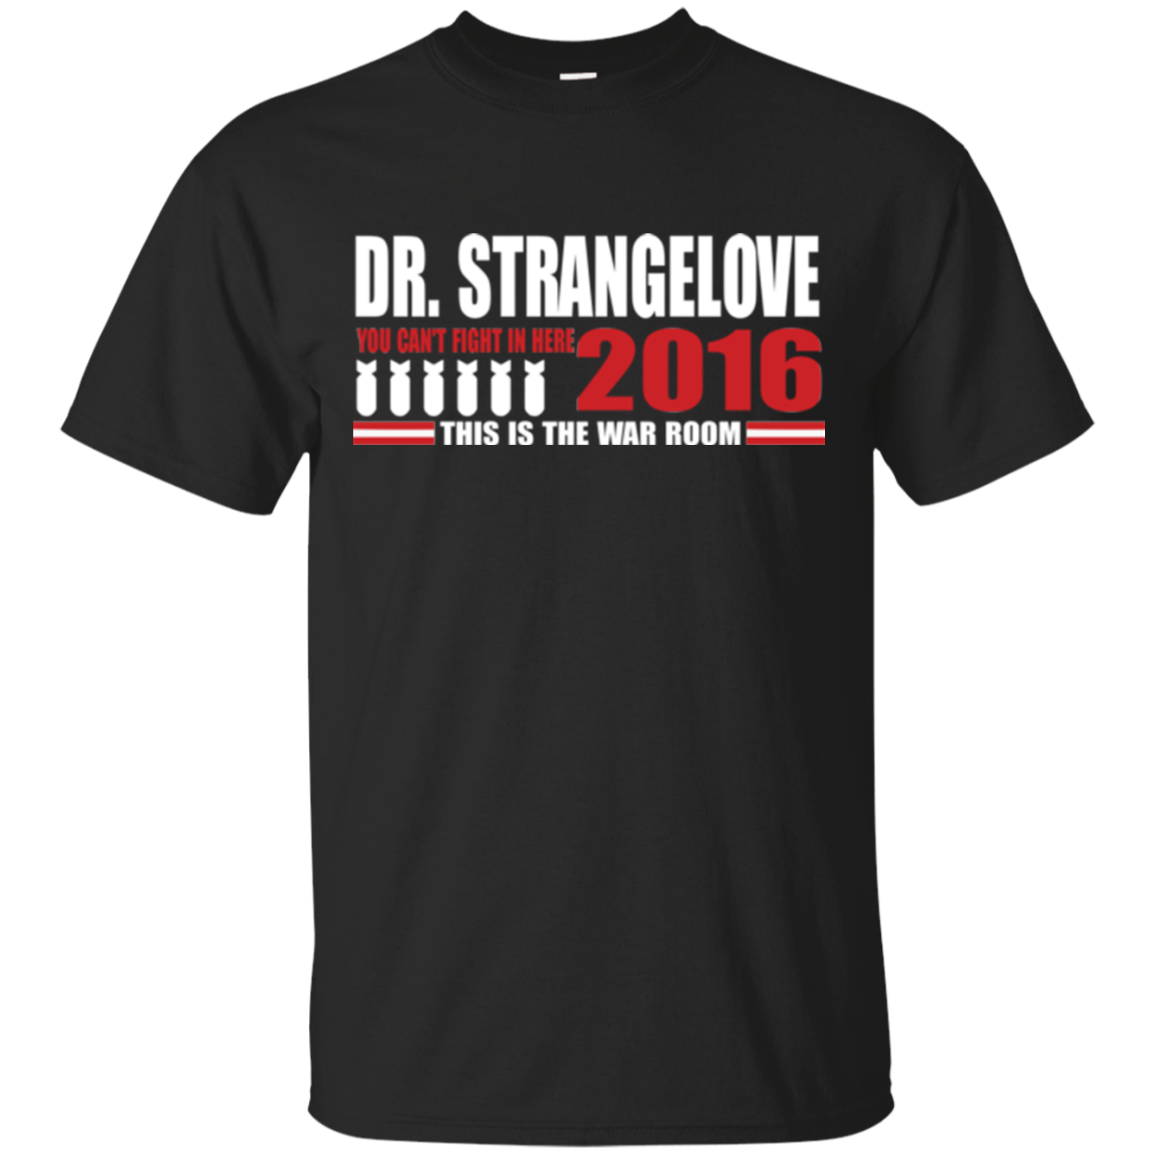 Dr. Strangelove Or Shirts You Can't Fight In Here Hoodies Sweatshirts ...